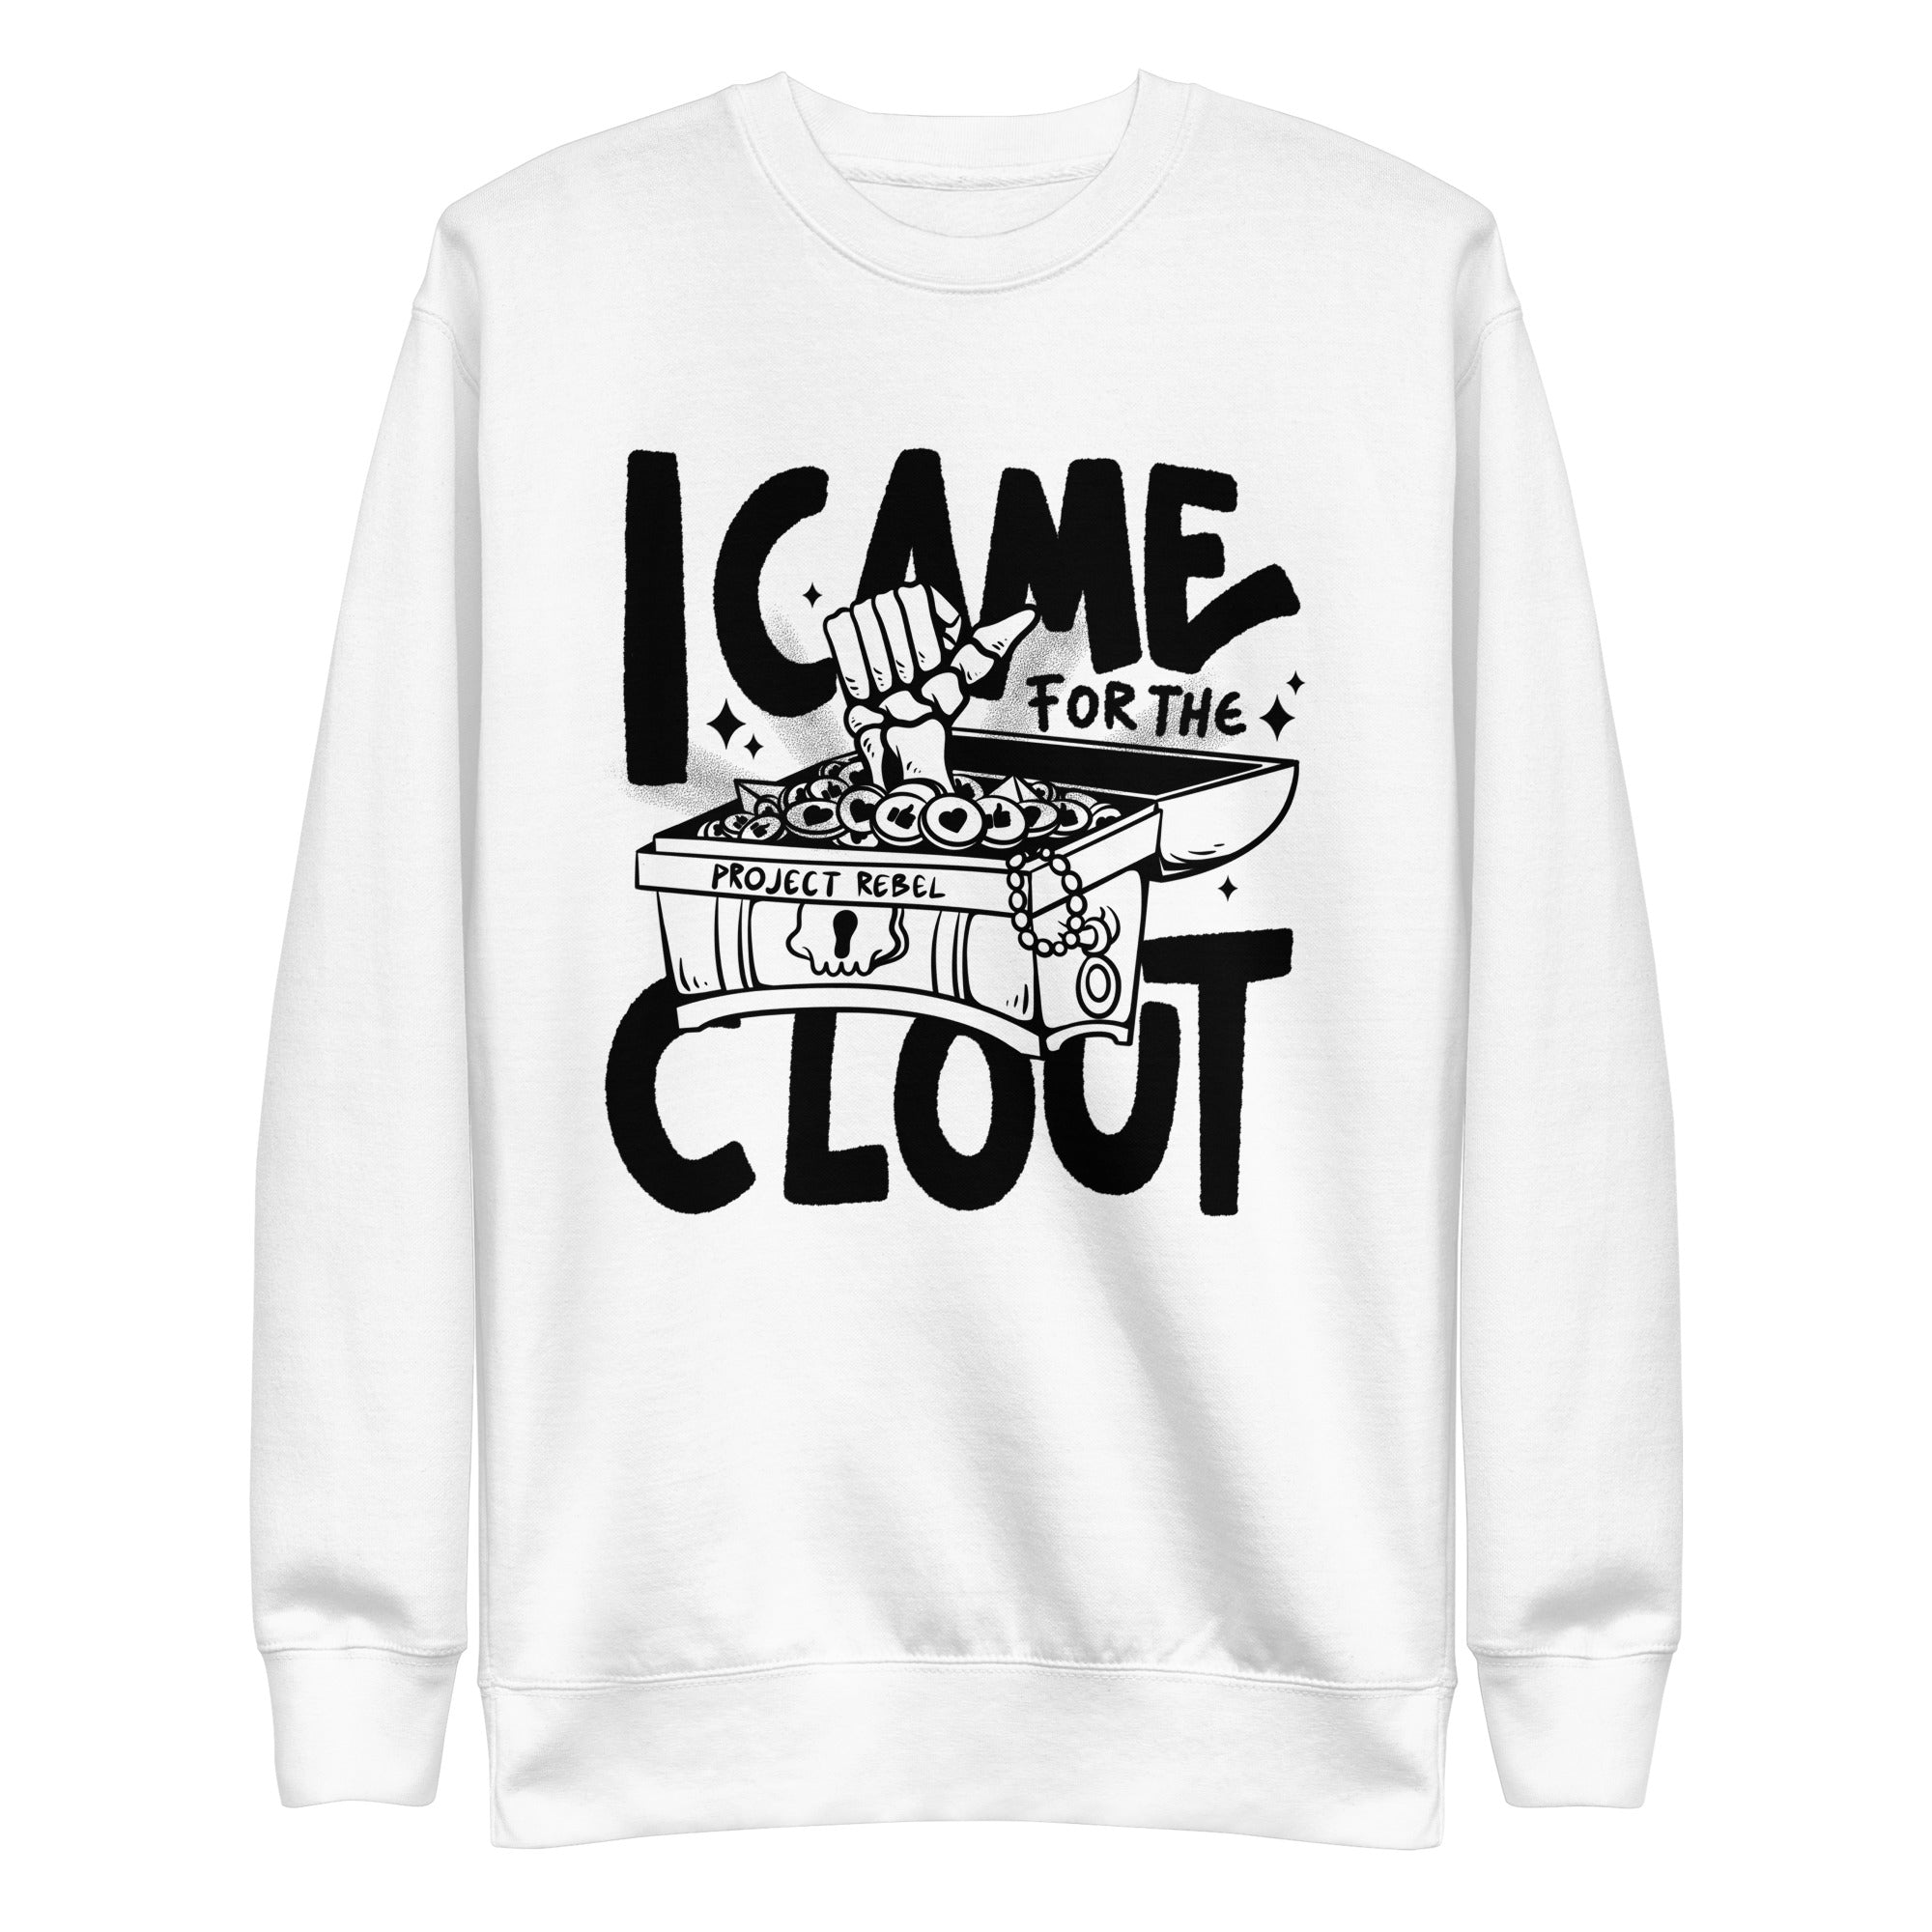 For the Clout Sweatshirt - ProjectRebelClothing